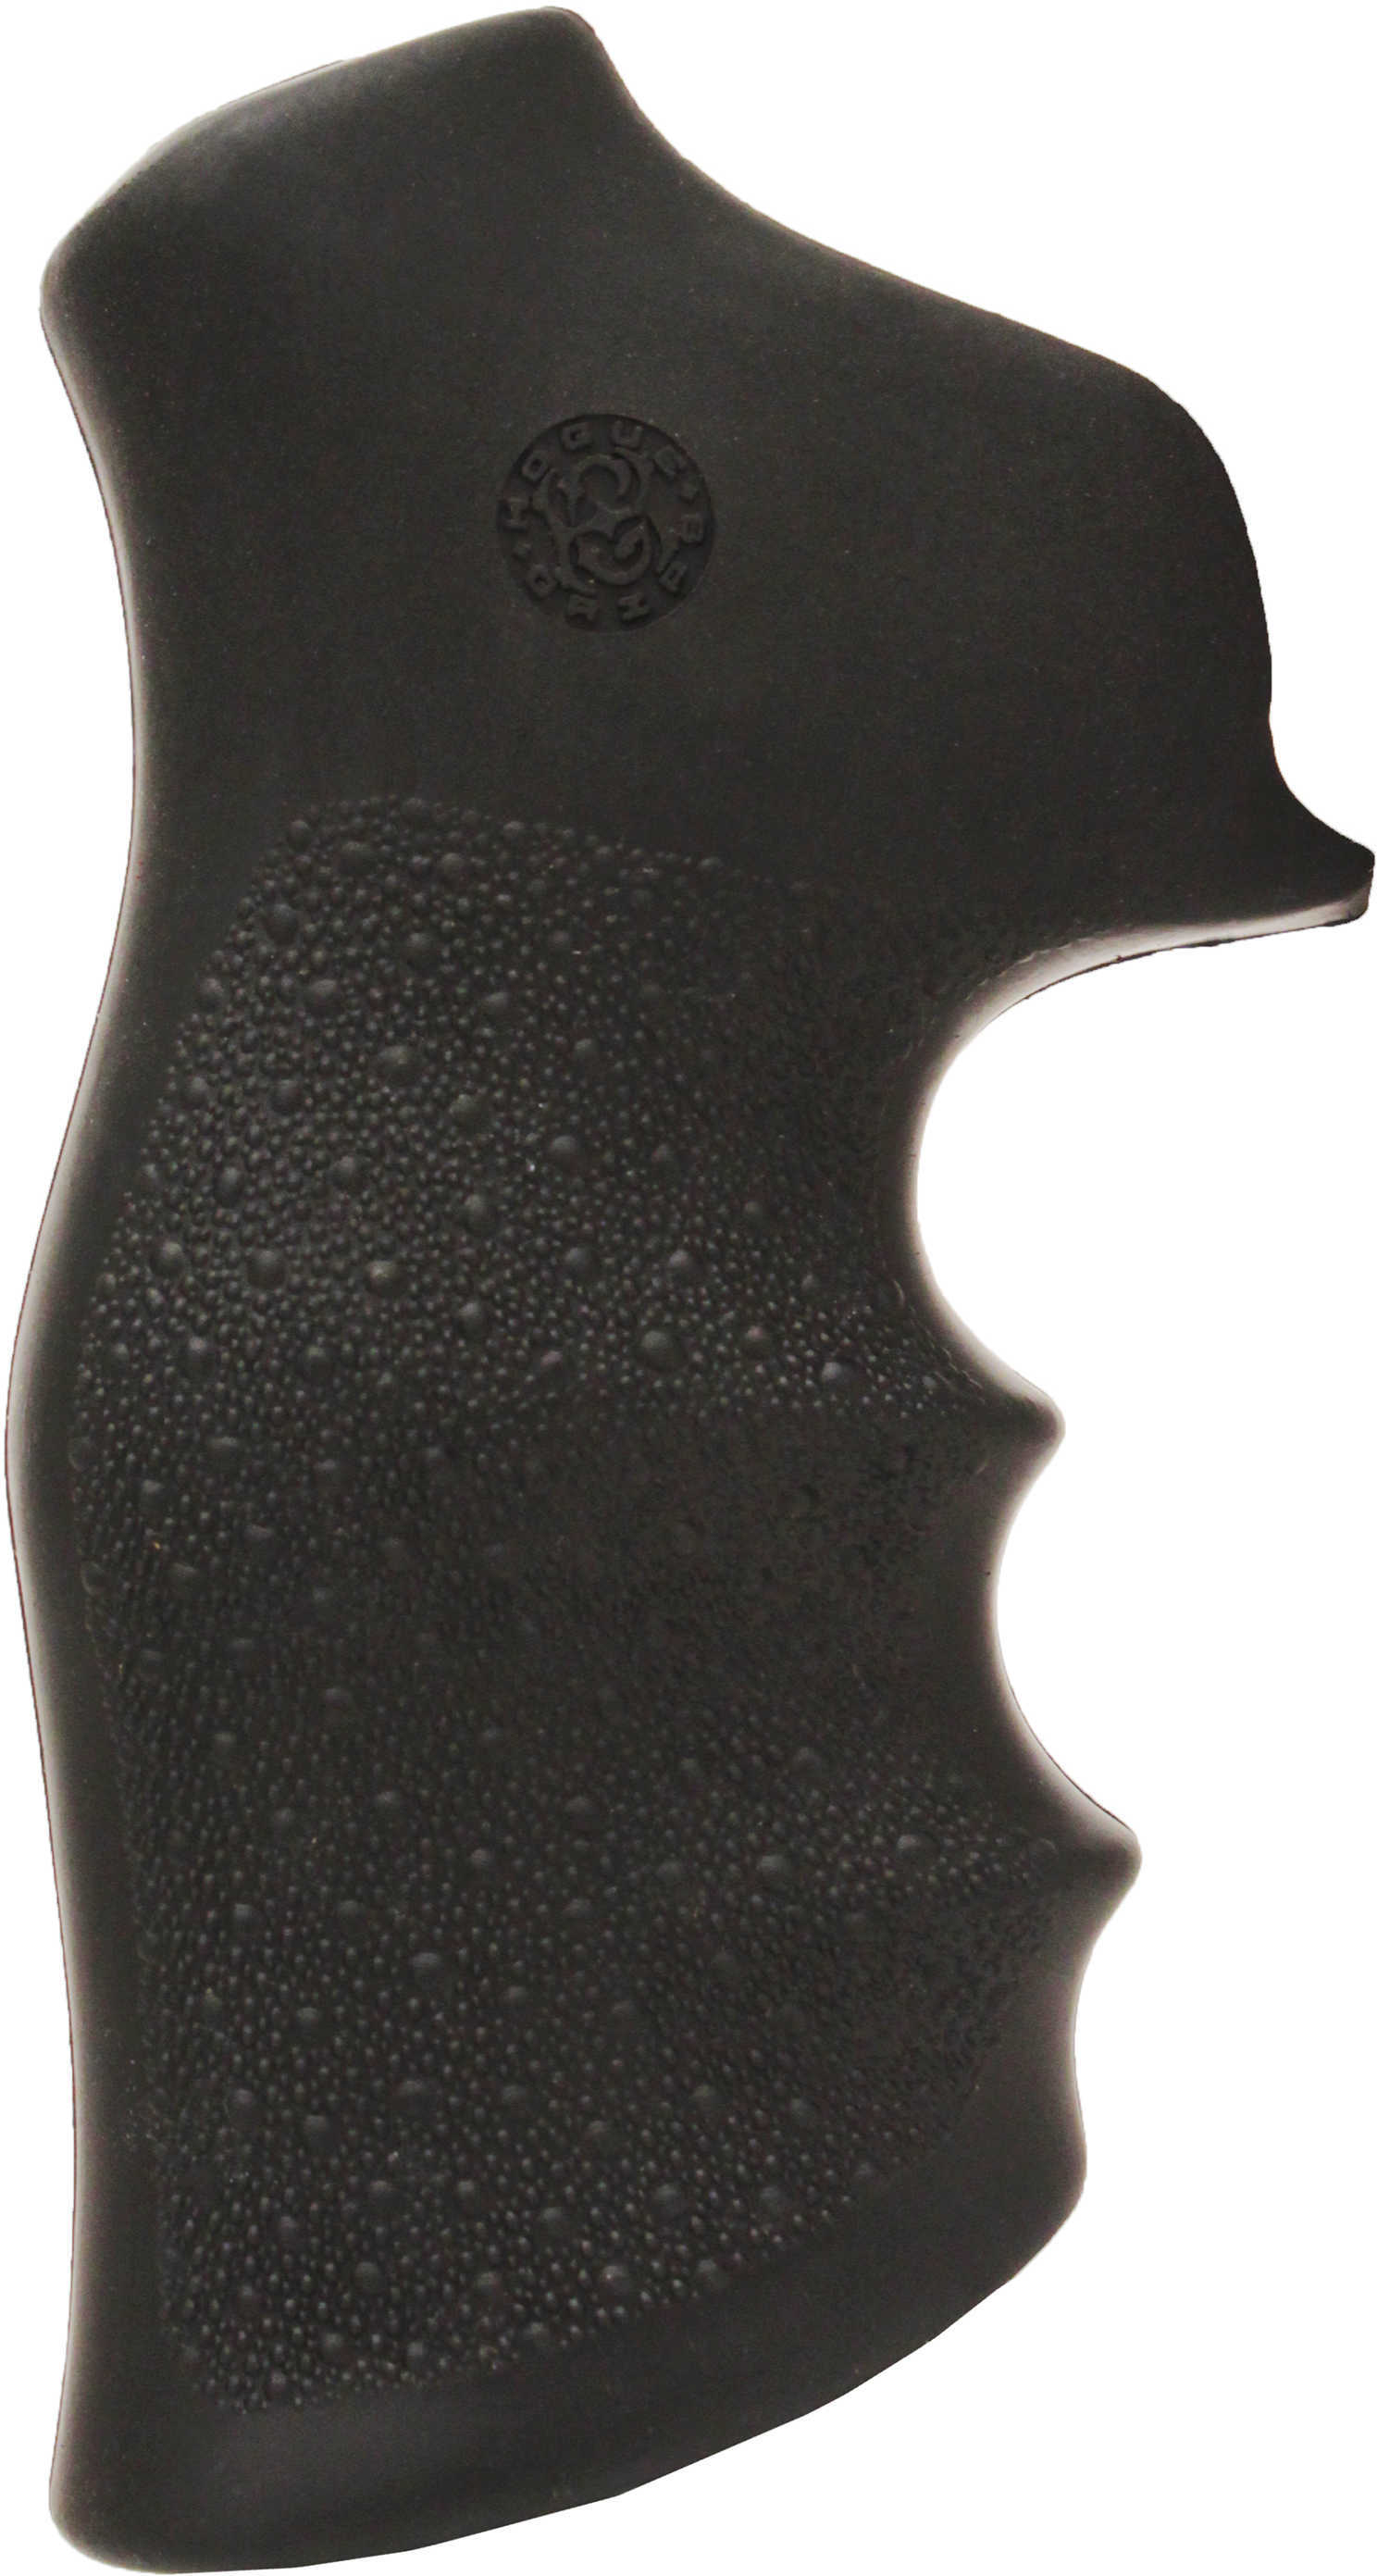 Hogue Rubber Grip With Finger Grooves Ruger® GP100 Super Redhawk Durable Synthetic Cobblestone Texture - Lig